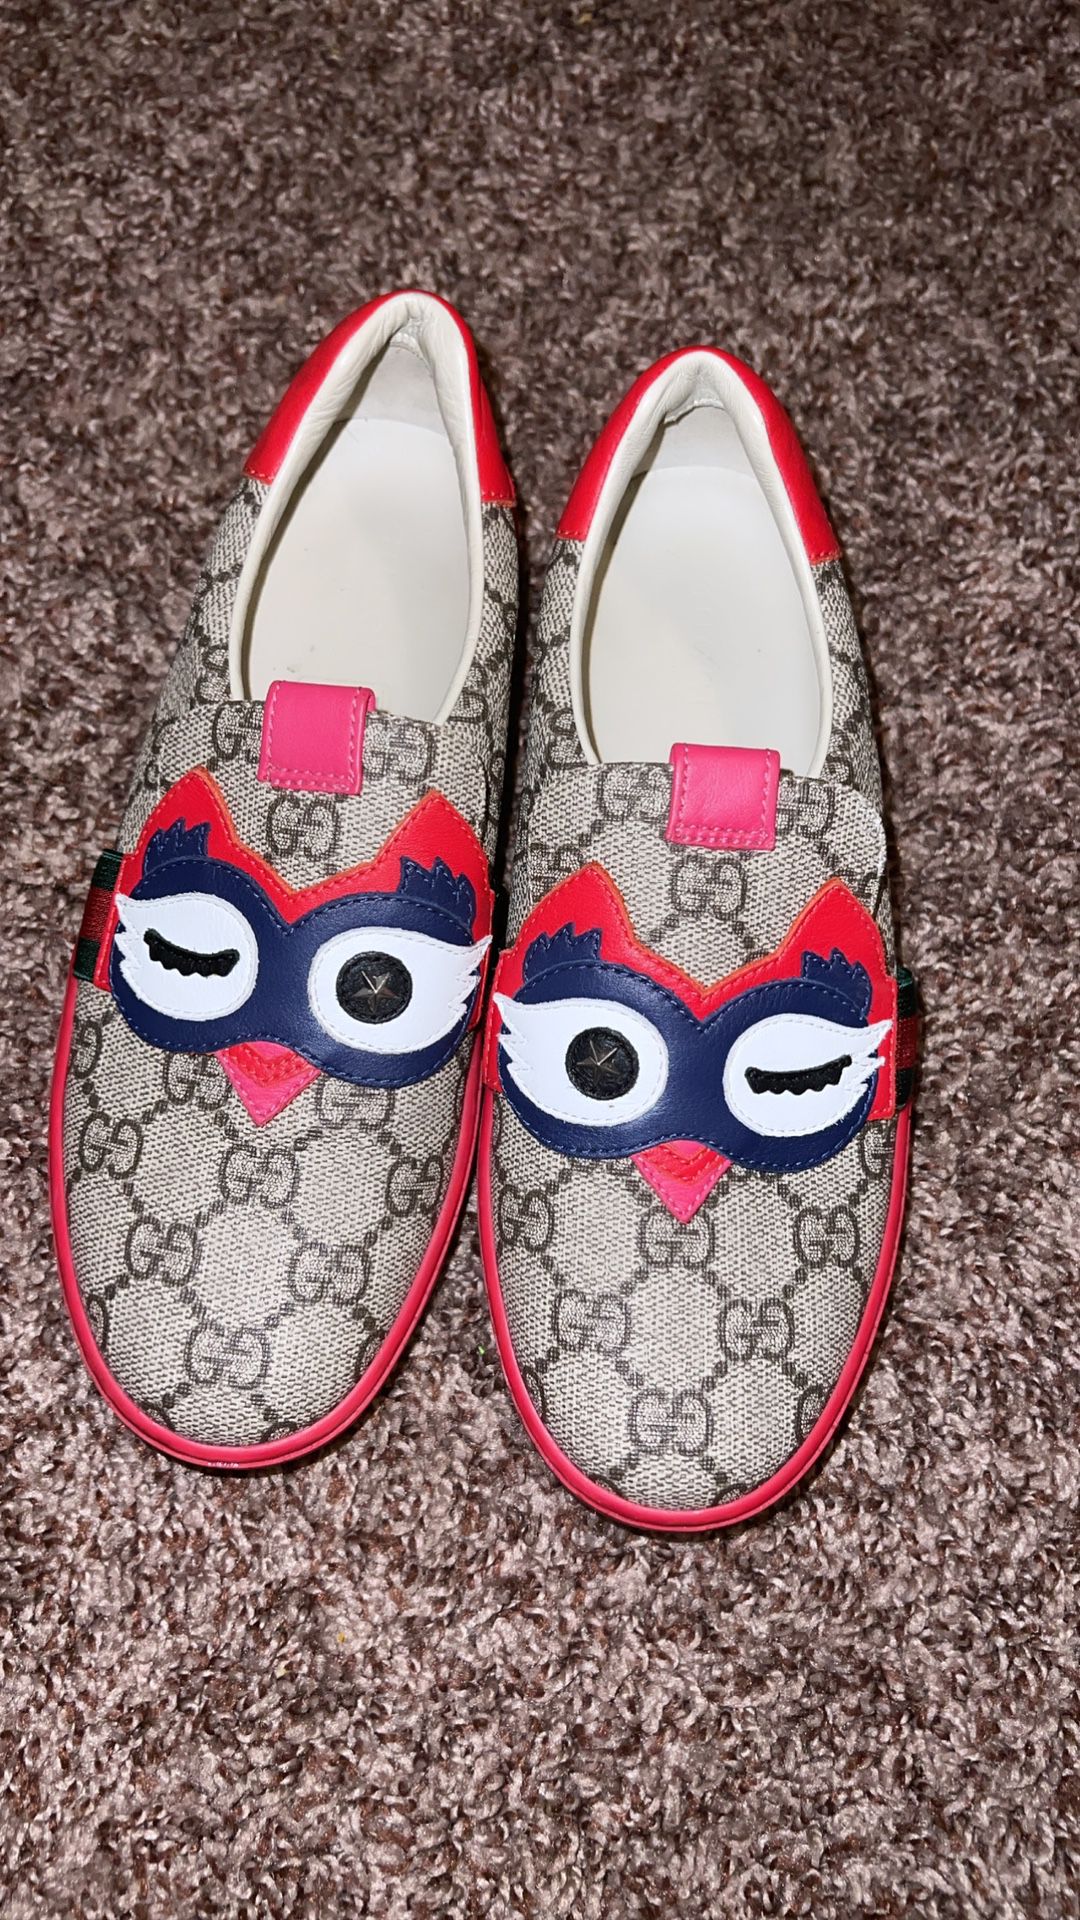 Authentic Gucci Shoes Size 35 ( 3 Kids ) 24.5 ( 8c Toddler)